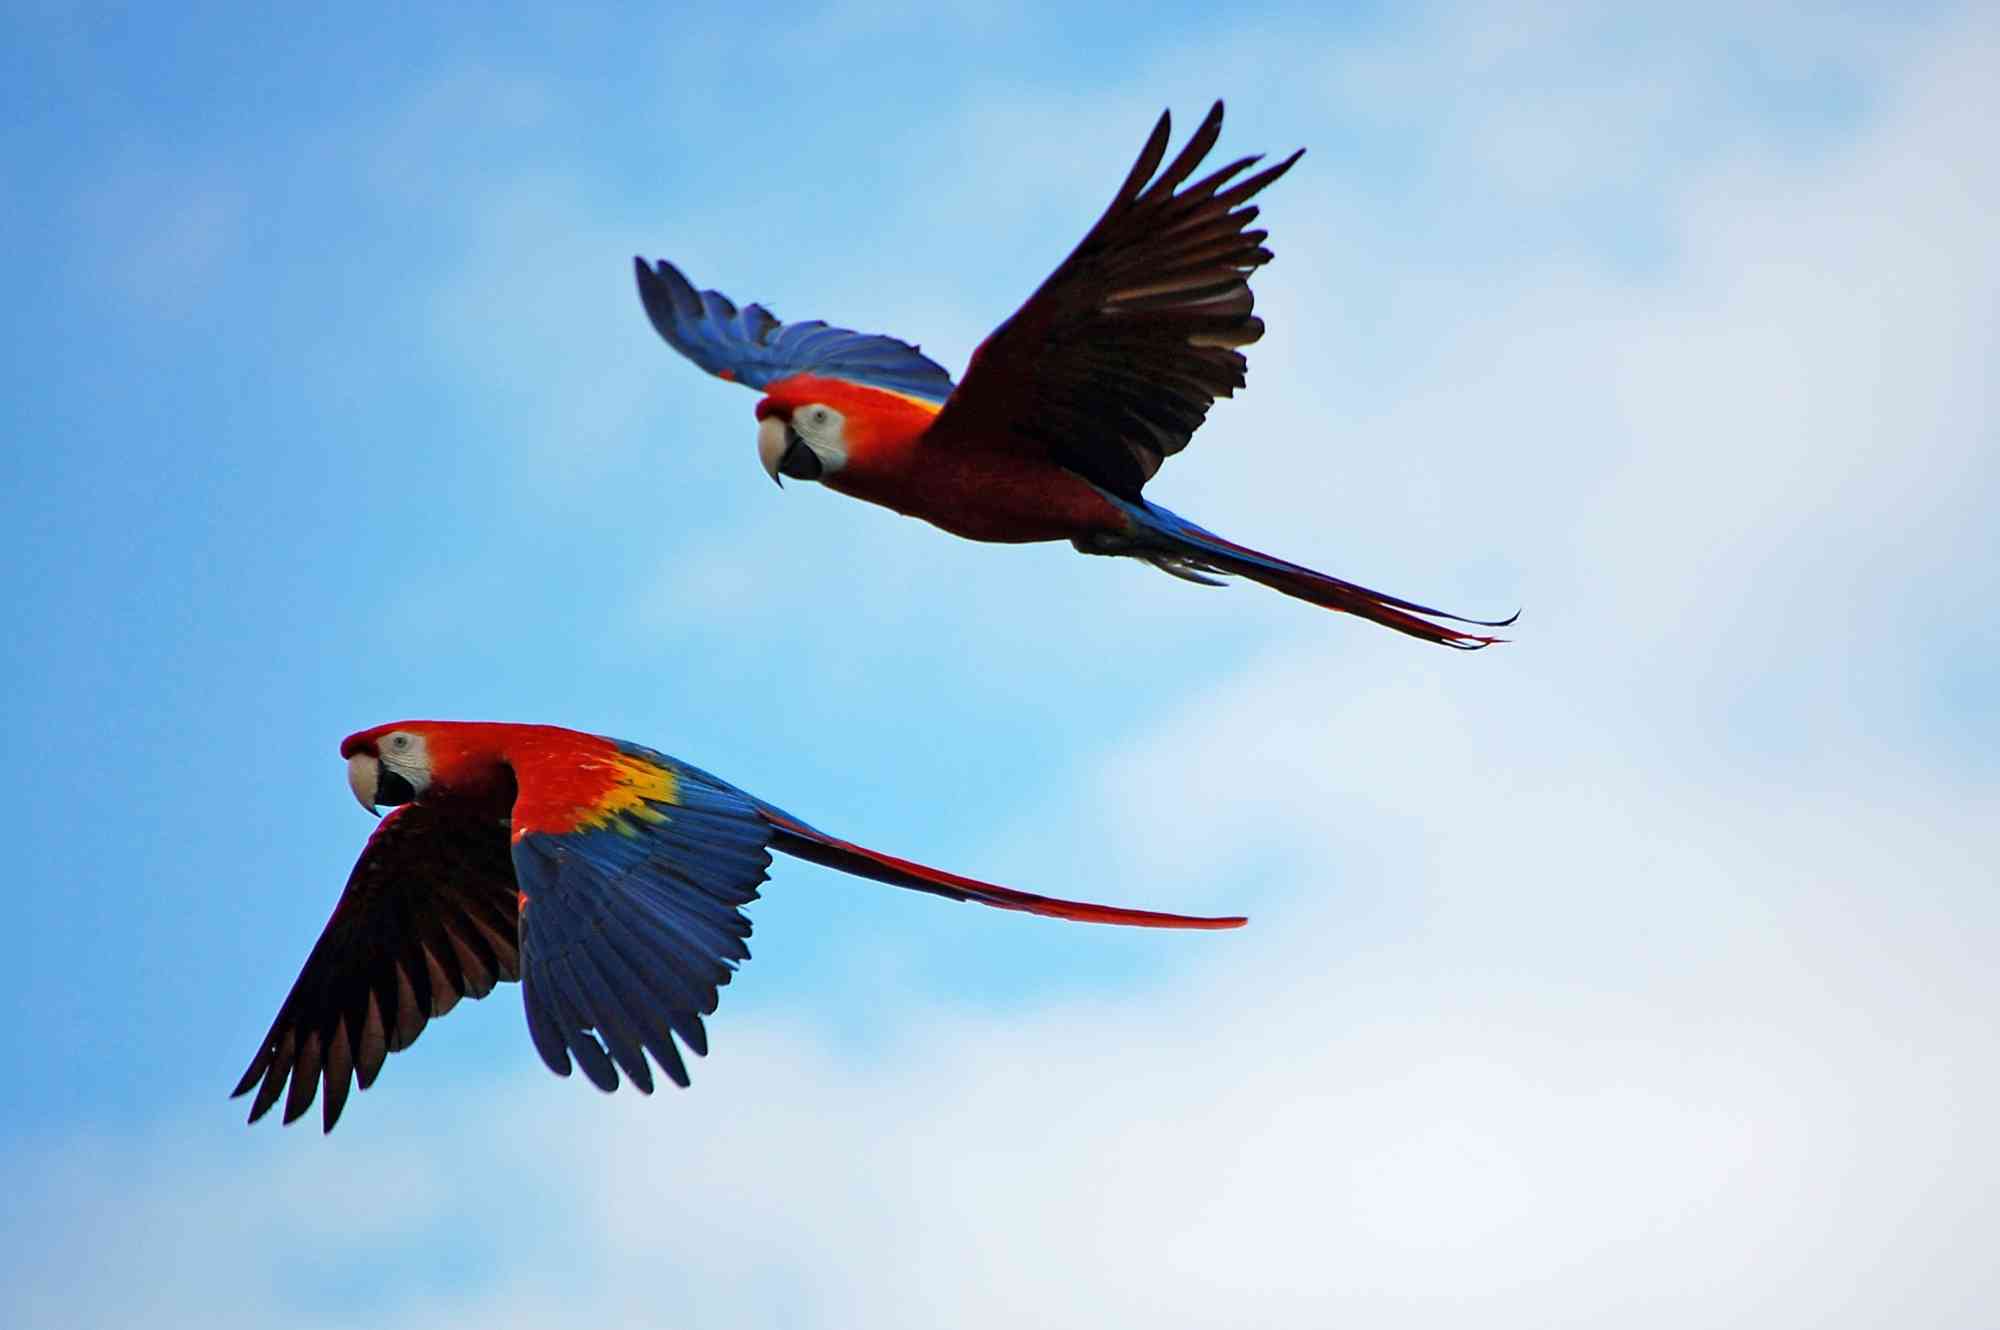 Pair of Macaws Flying Together